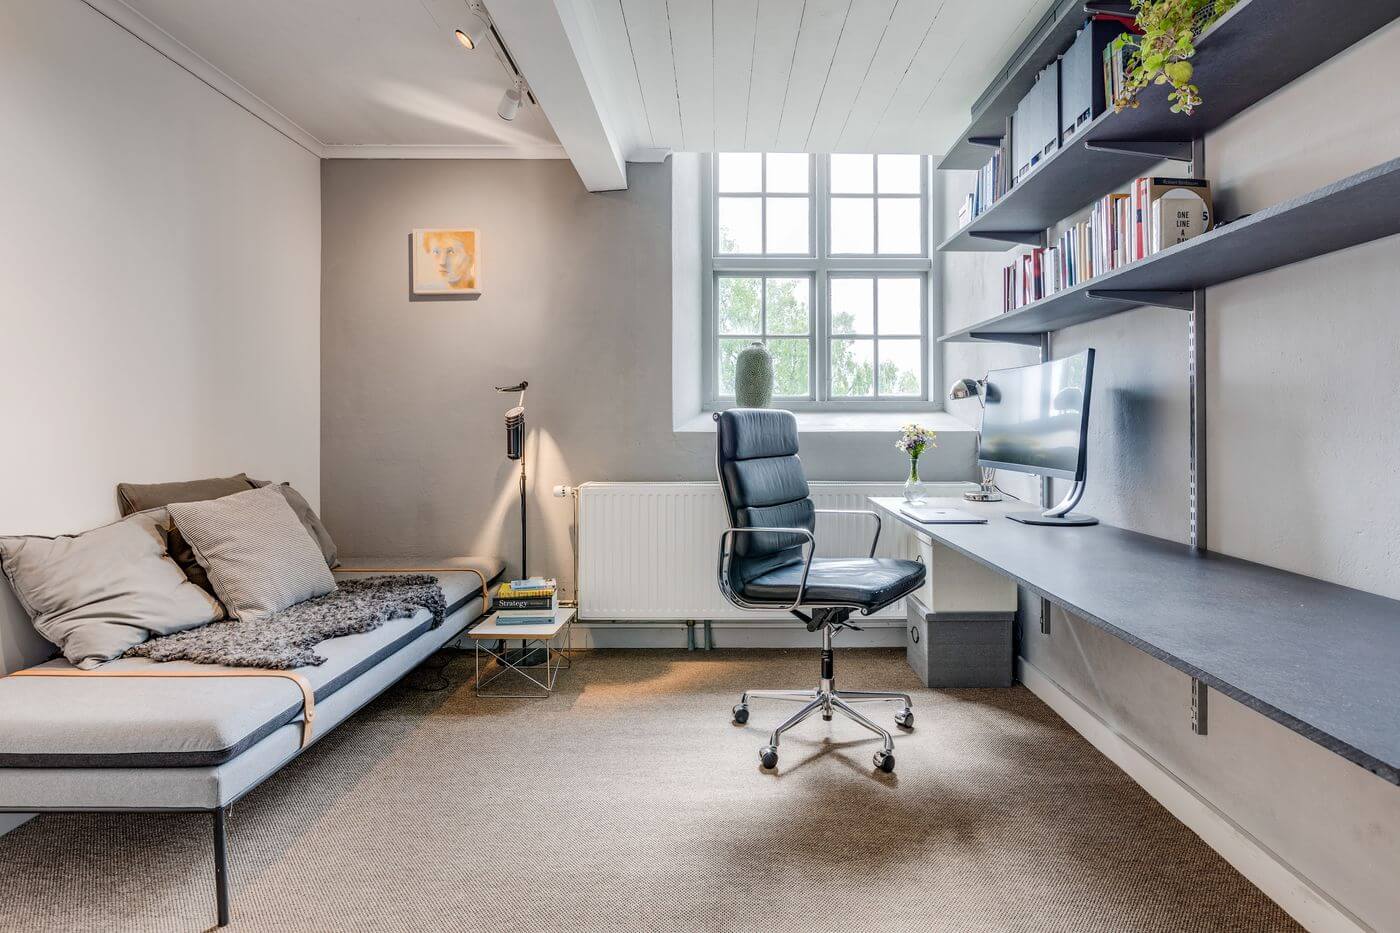 home-office-church-conversion-sweden-nordroom